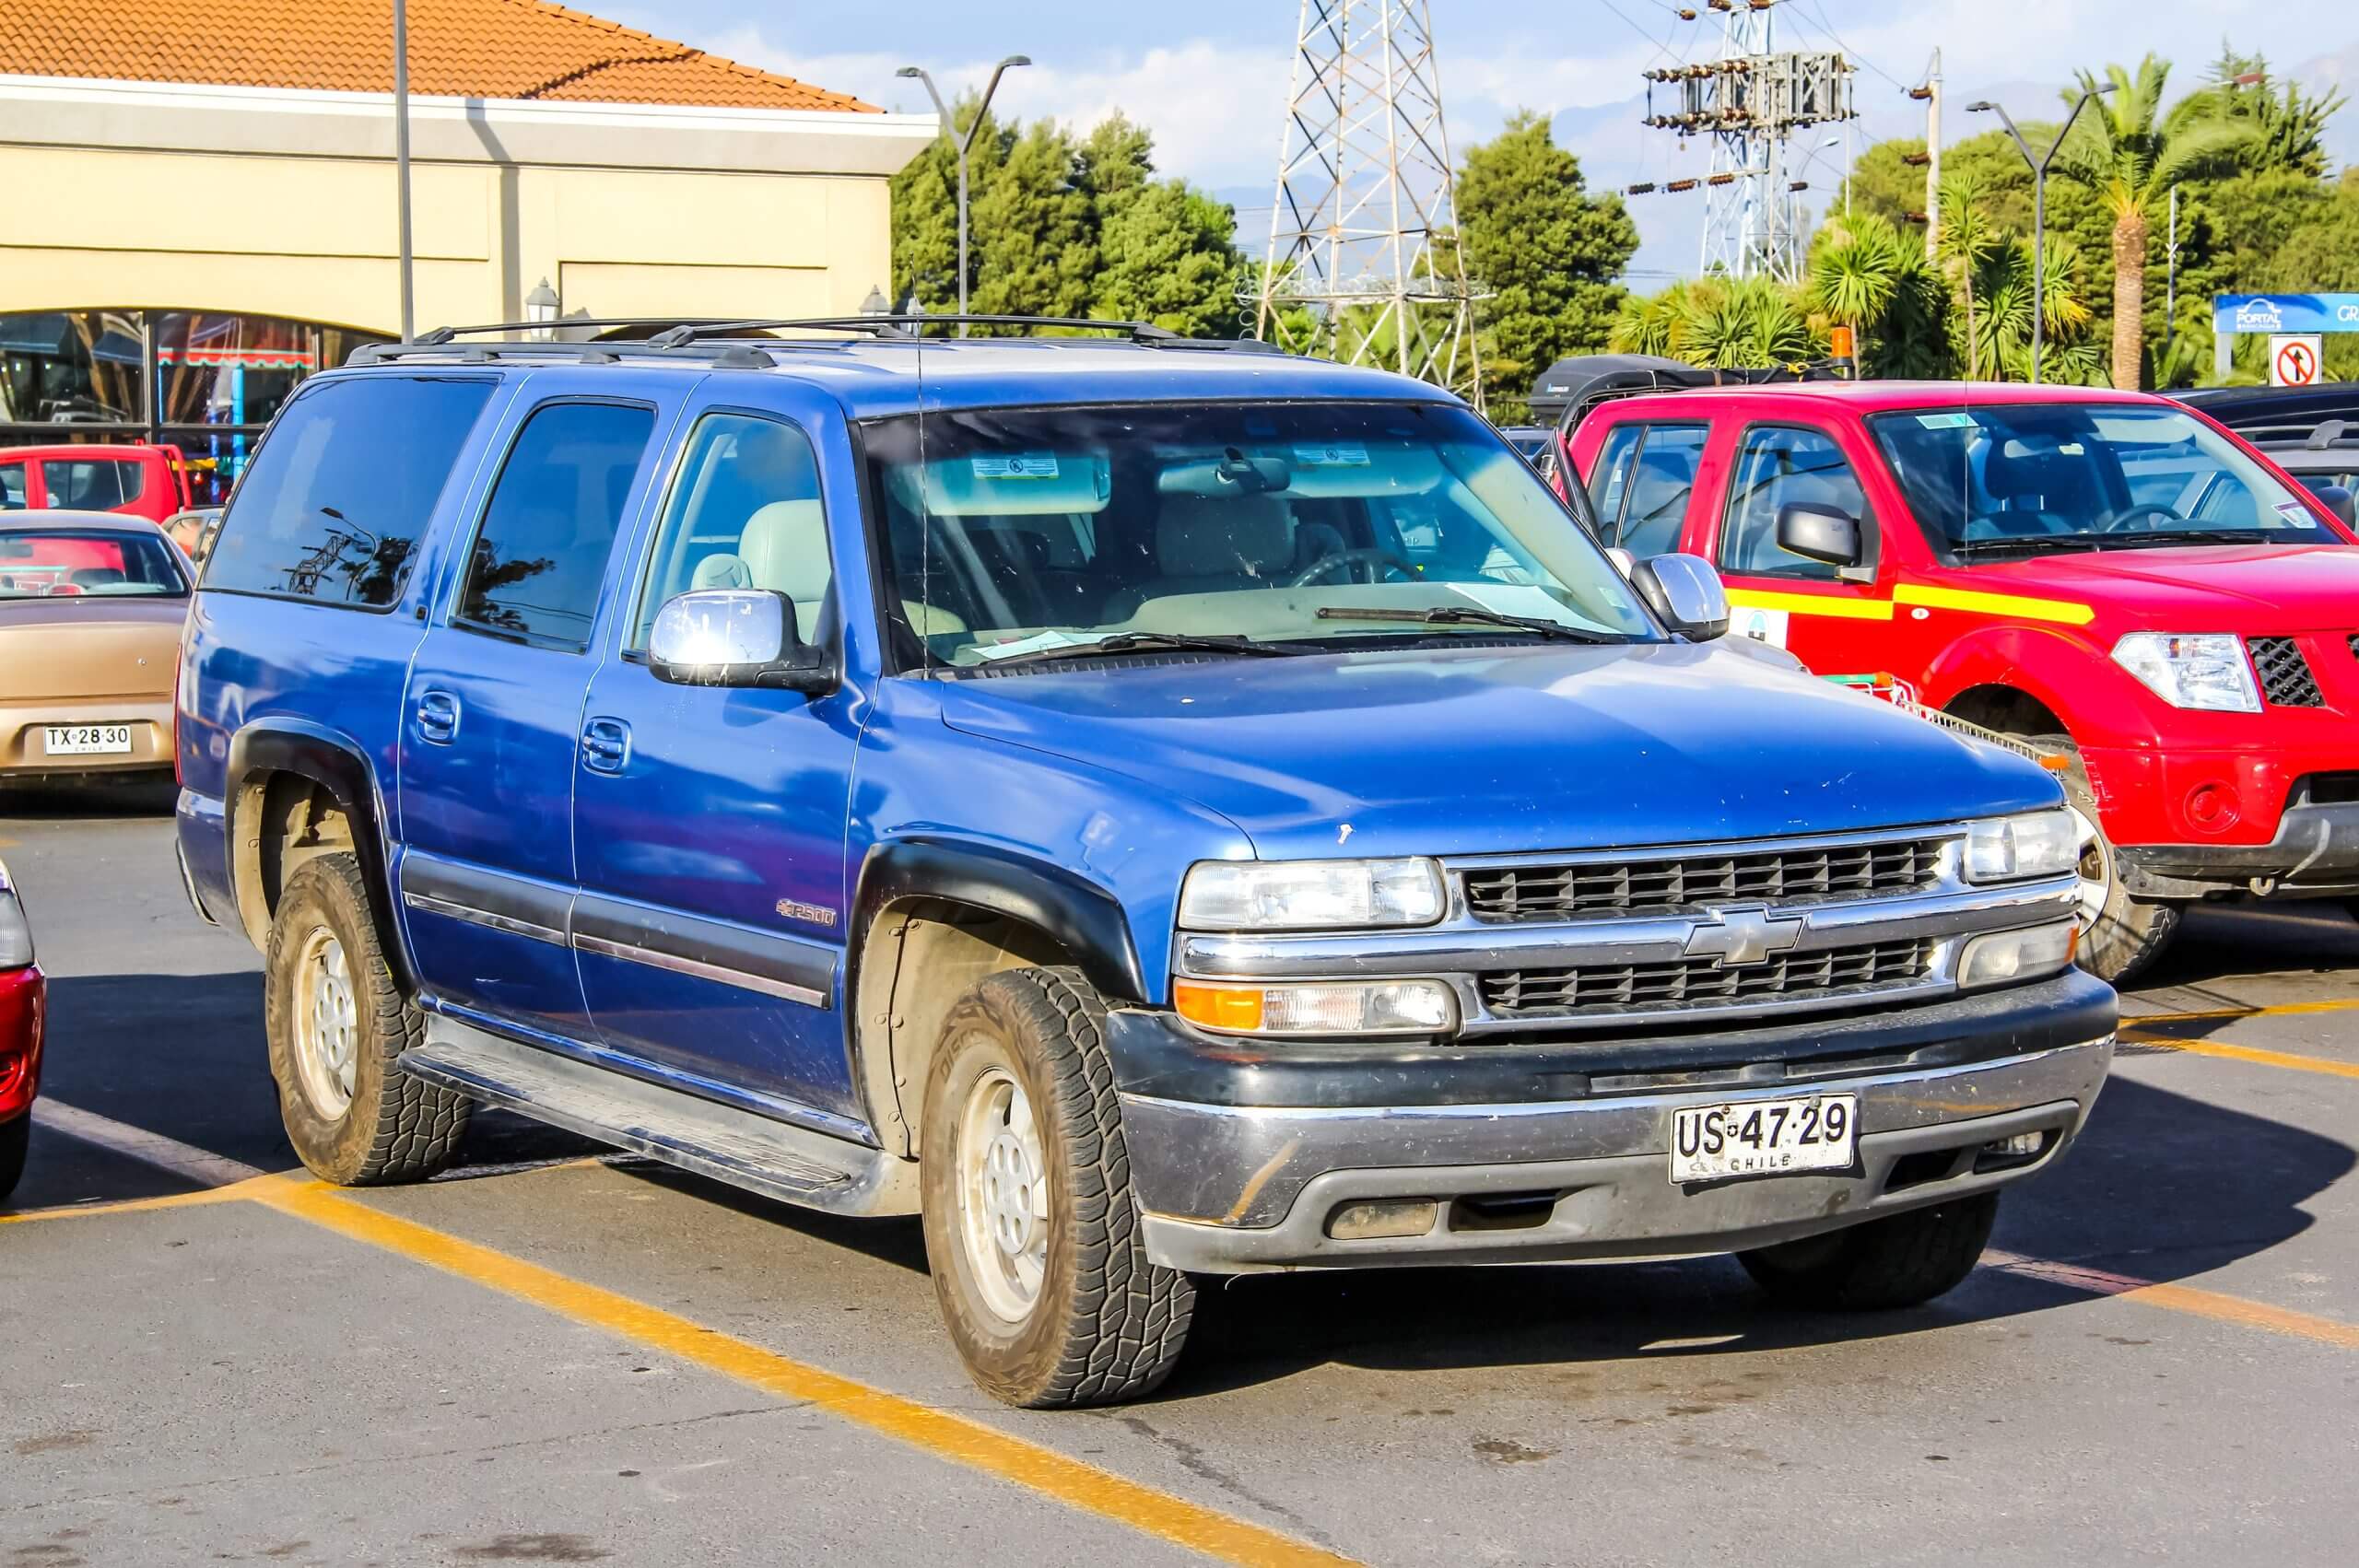 2001 Blue Chevrolet Tahoe in the city street.